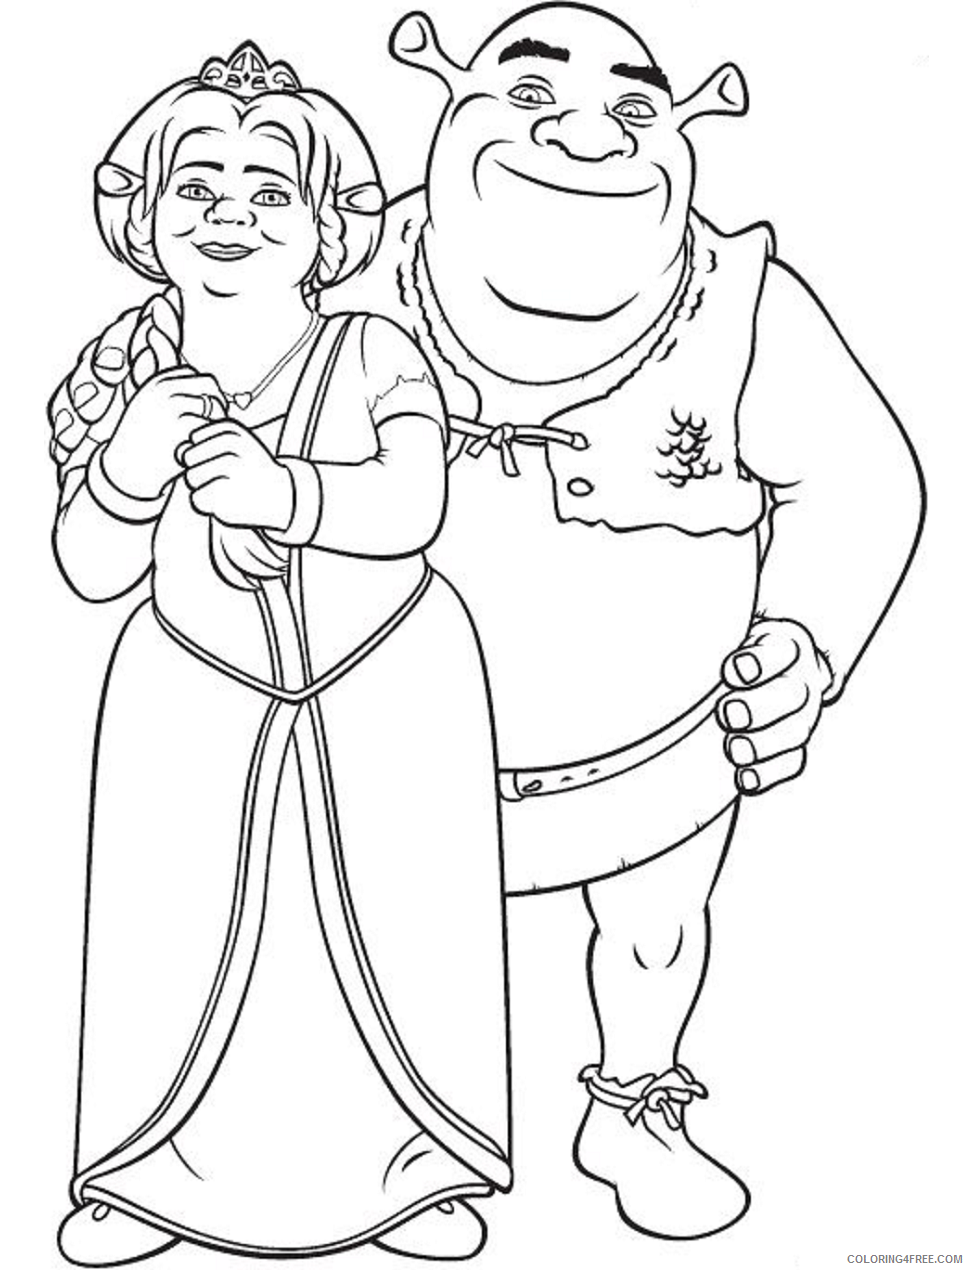 Shrek Coloring Pages Cartoons 1569511956_fiona_and_shrek_are_happy a4 Printable 2020 5406 Coloring4free